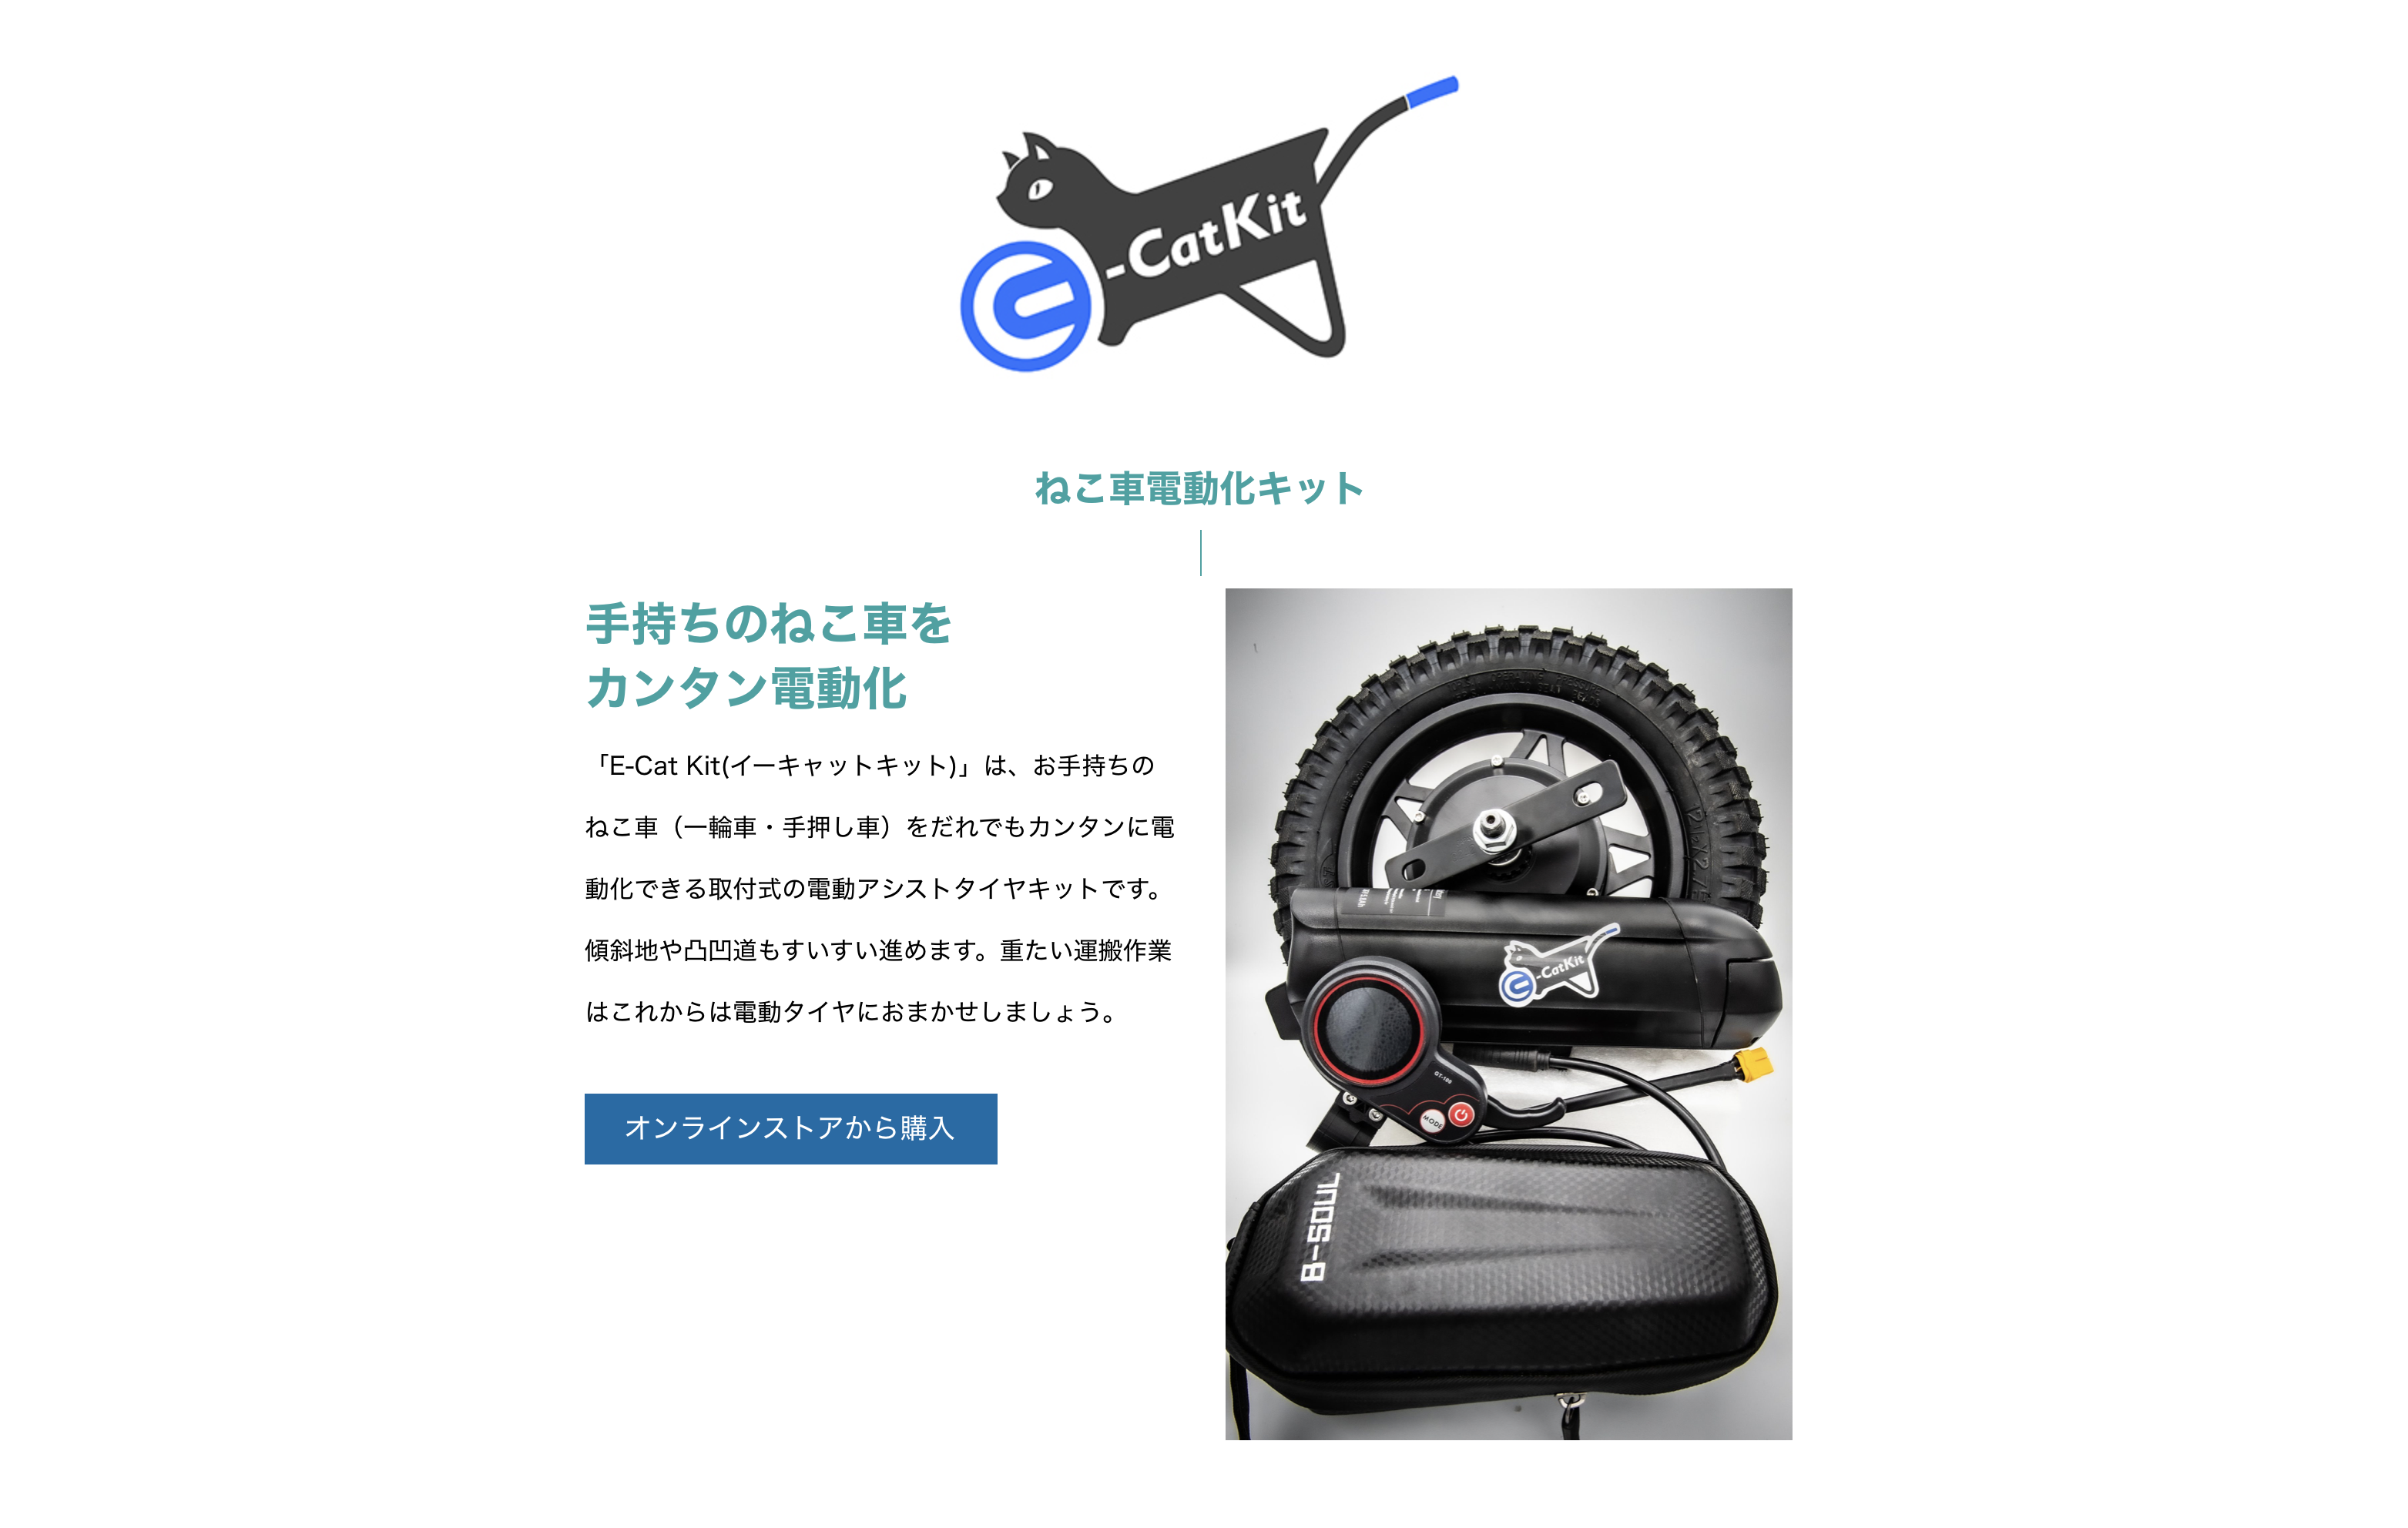 E-Cat Kit, an electrically assisted tire kit&nbsp; &nbsp; &nbsp; &nbsp; &nbsp; &nbsp; &nbsp; &nbsp; https://cuborex.com/